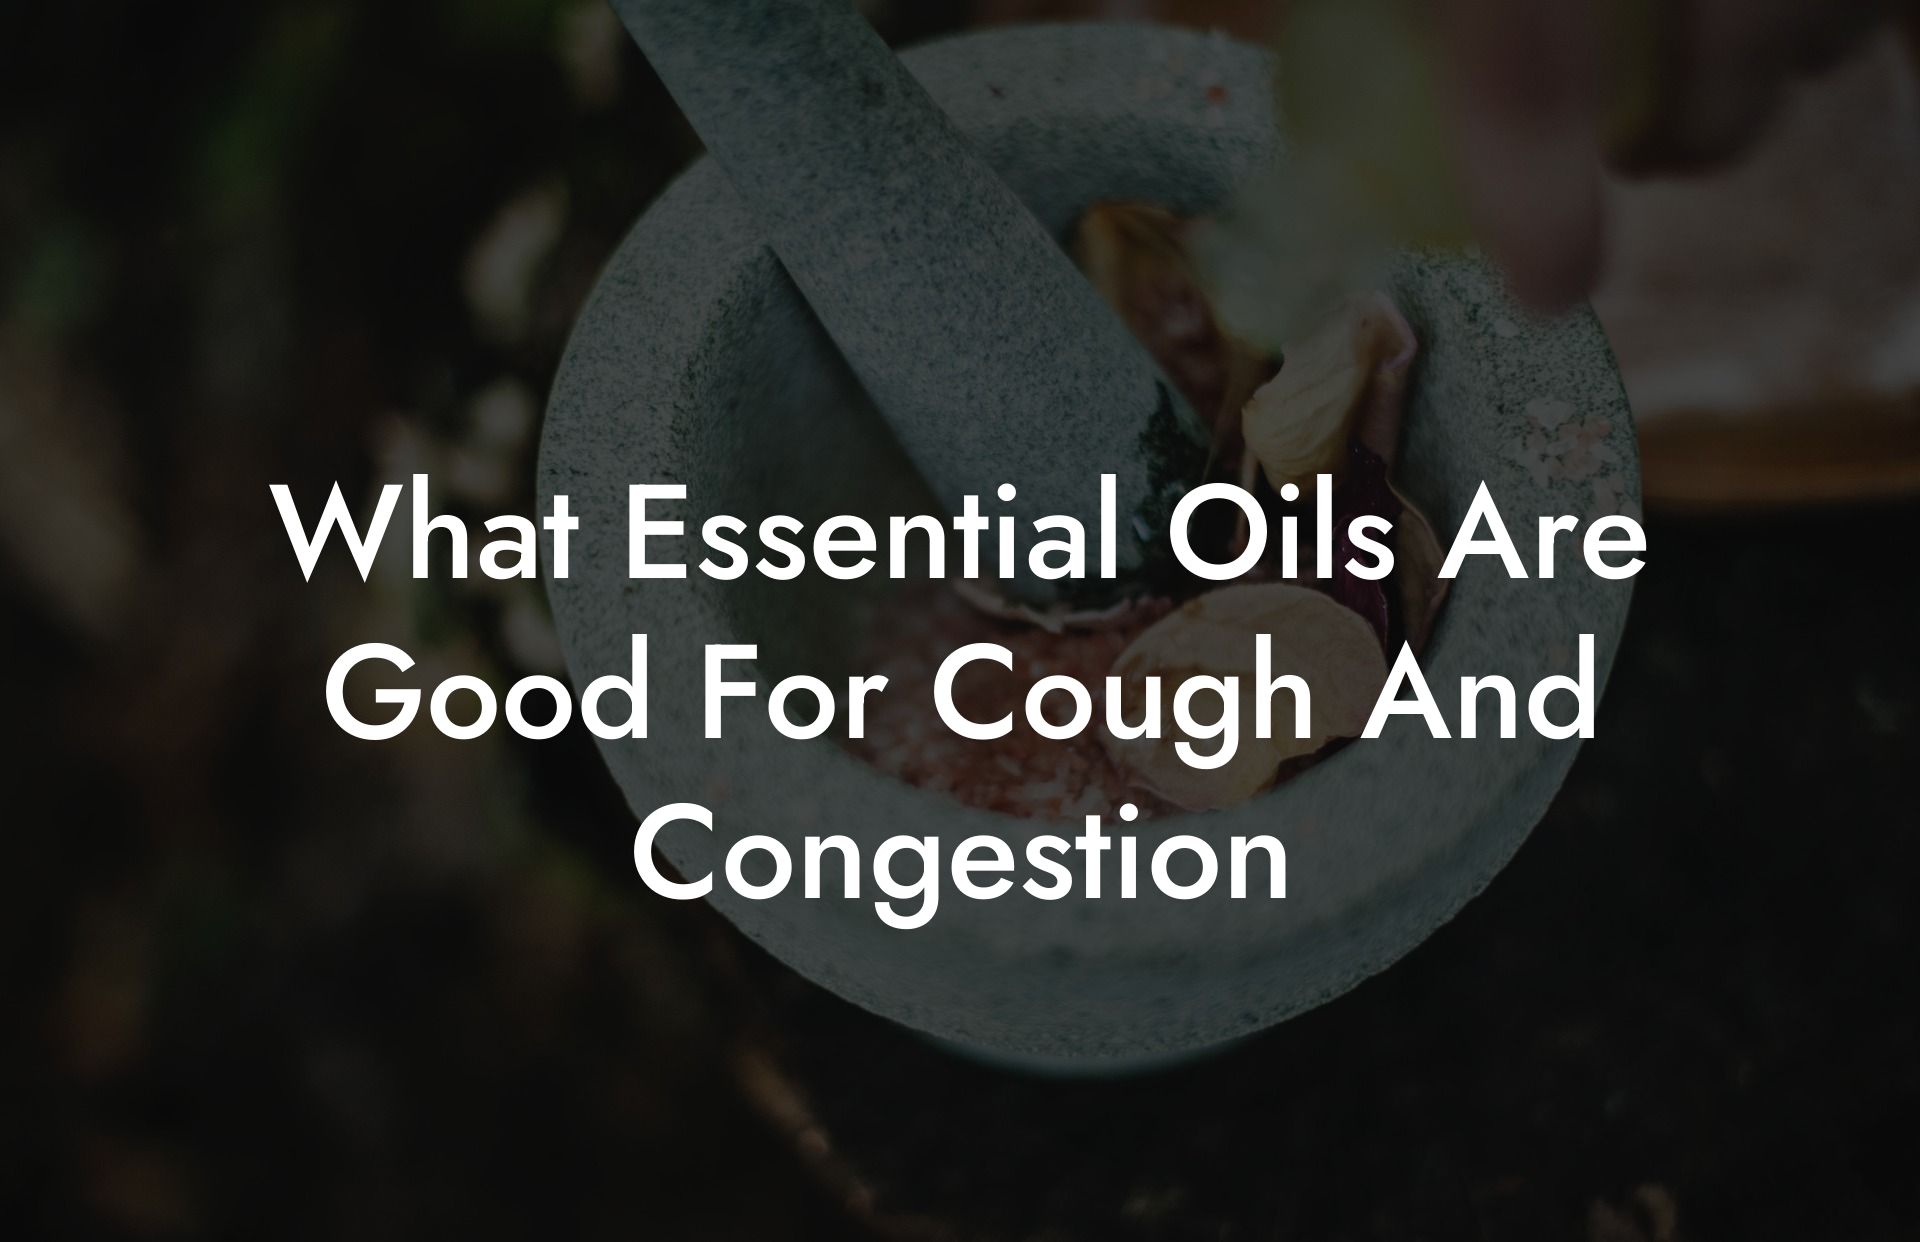 What Essential Oils Are Good For Cough And Congestion